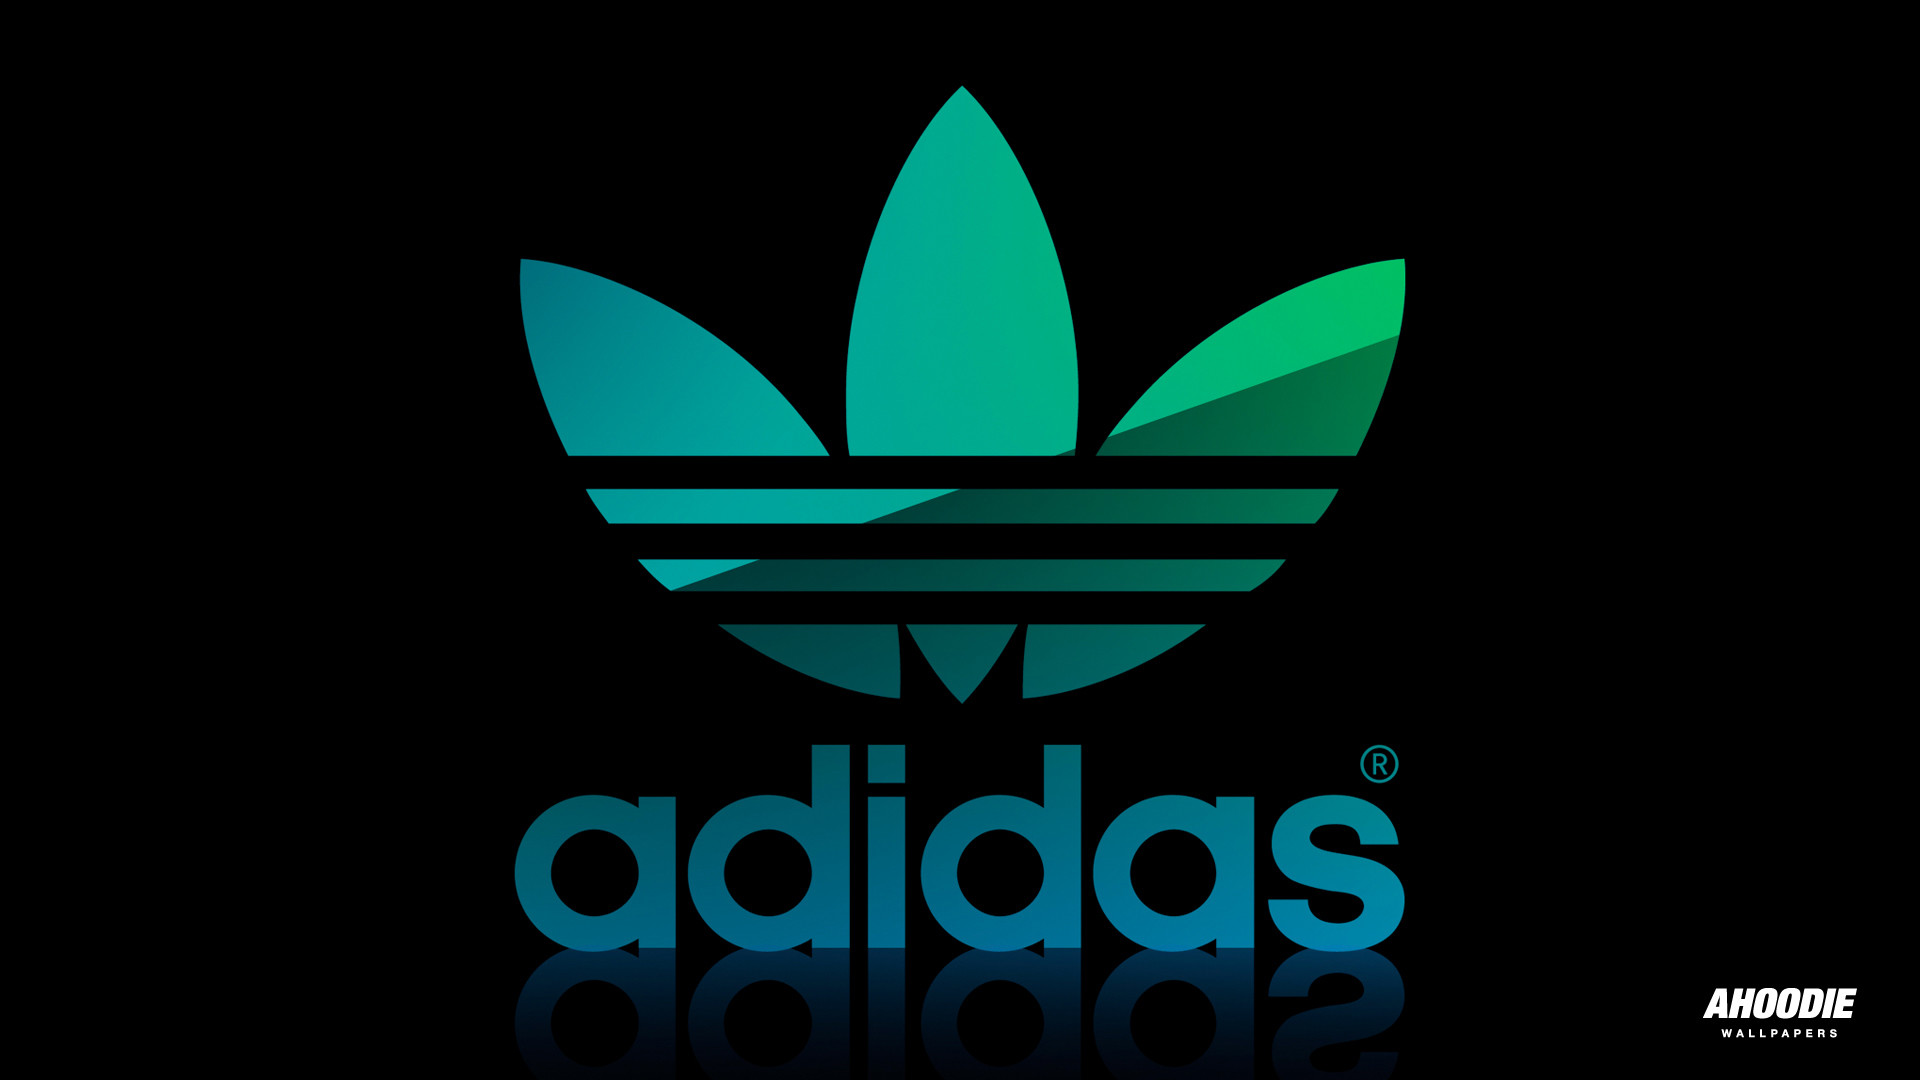 1920x1080 Computer Images of Adidas Logo by Doriane Nellies